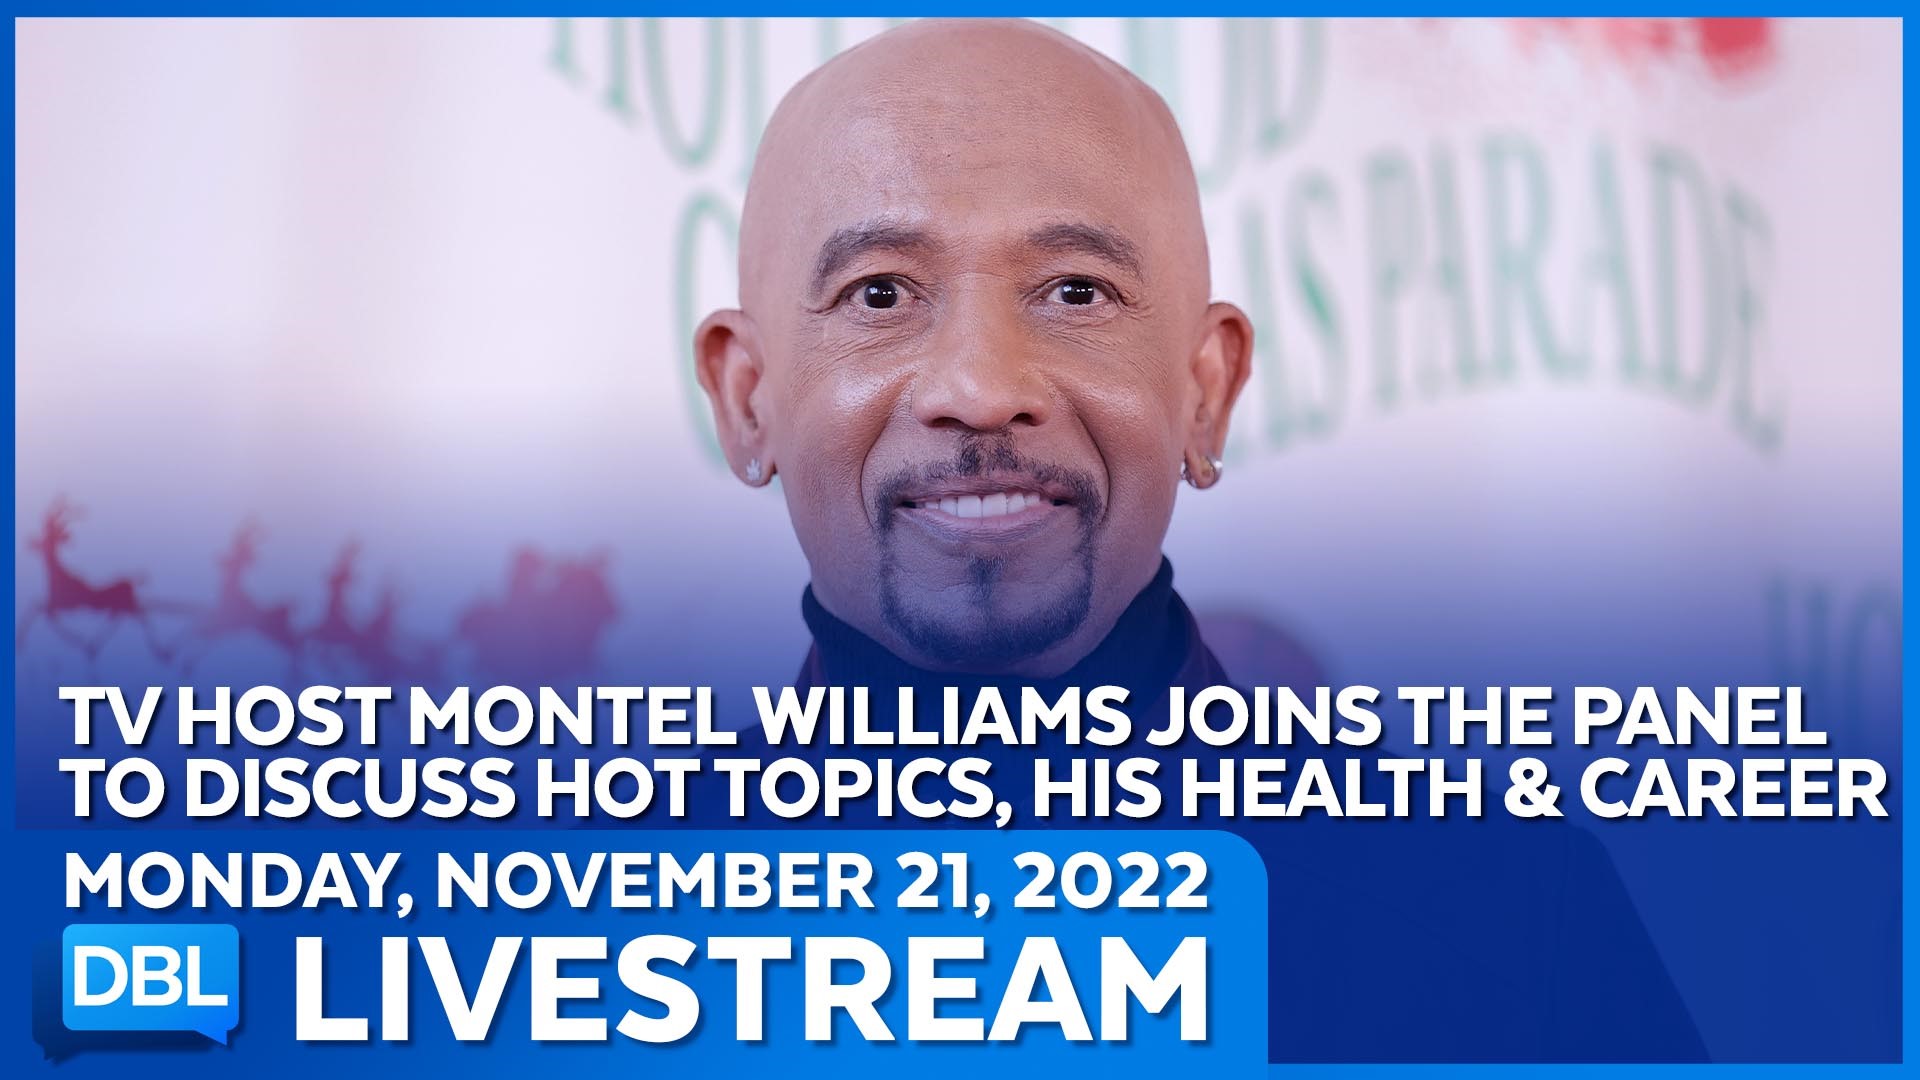 TV legend Montel Williams joins the panel to discuss the Colorado LGBTQ+ club shooting and the impact of his talk show; Actress Laura Dern discusses mental health.